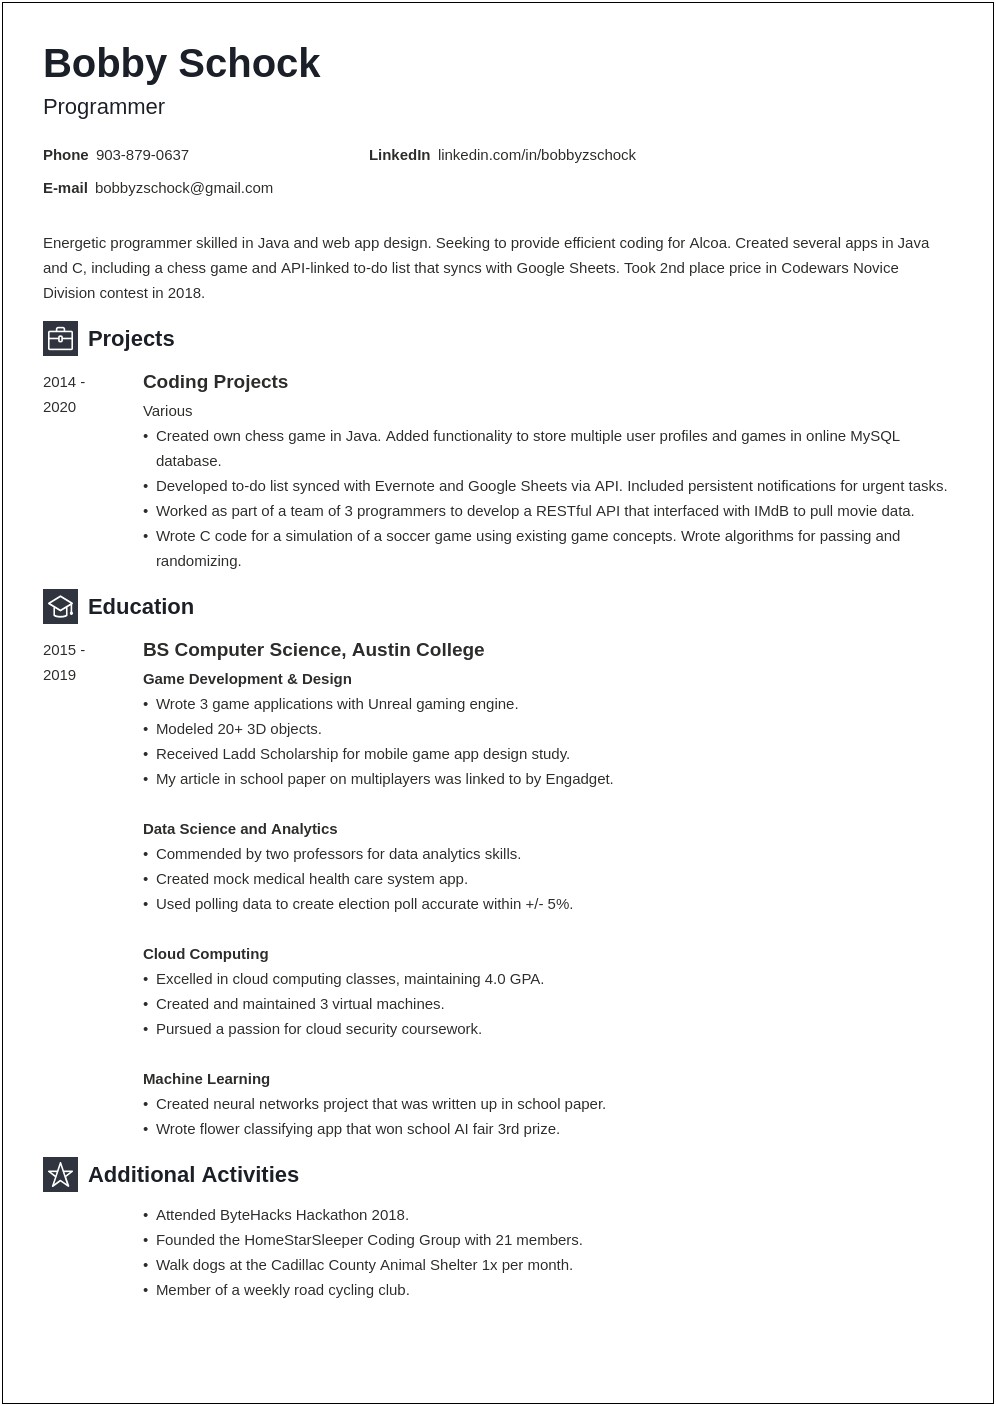 Resume Objectives To Gain Experience